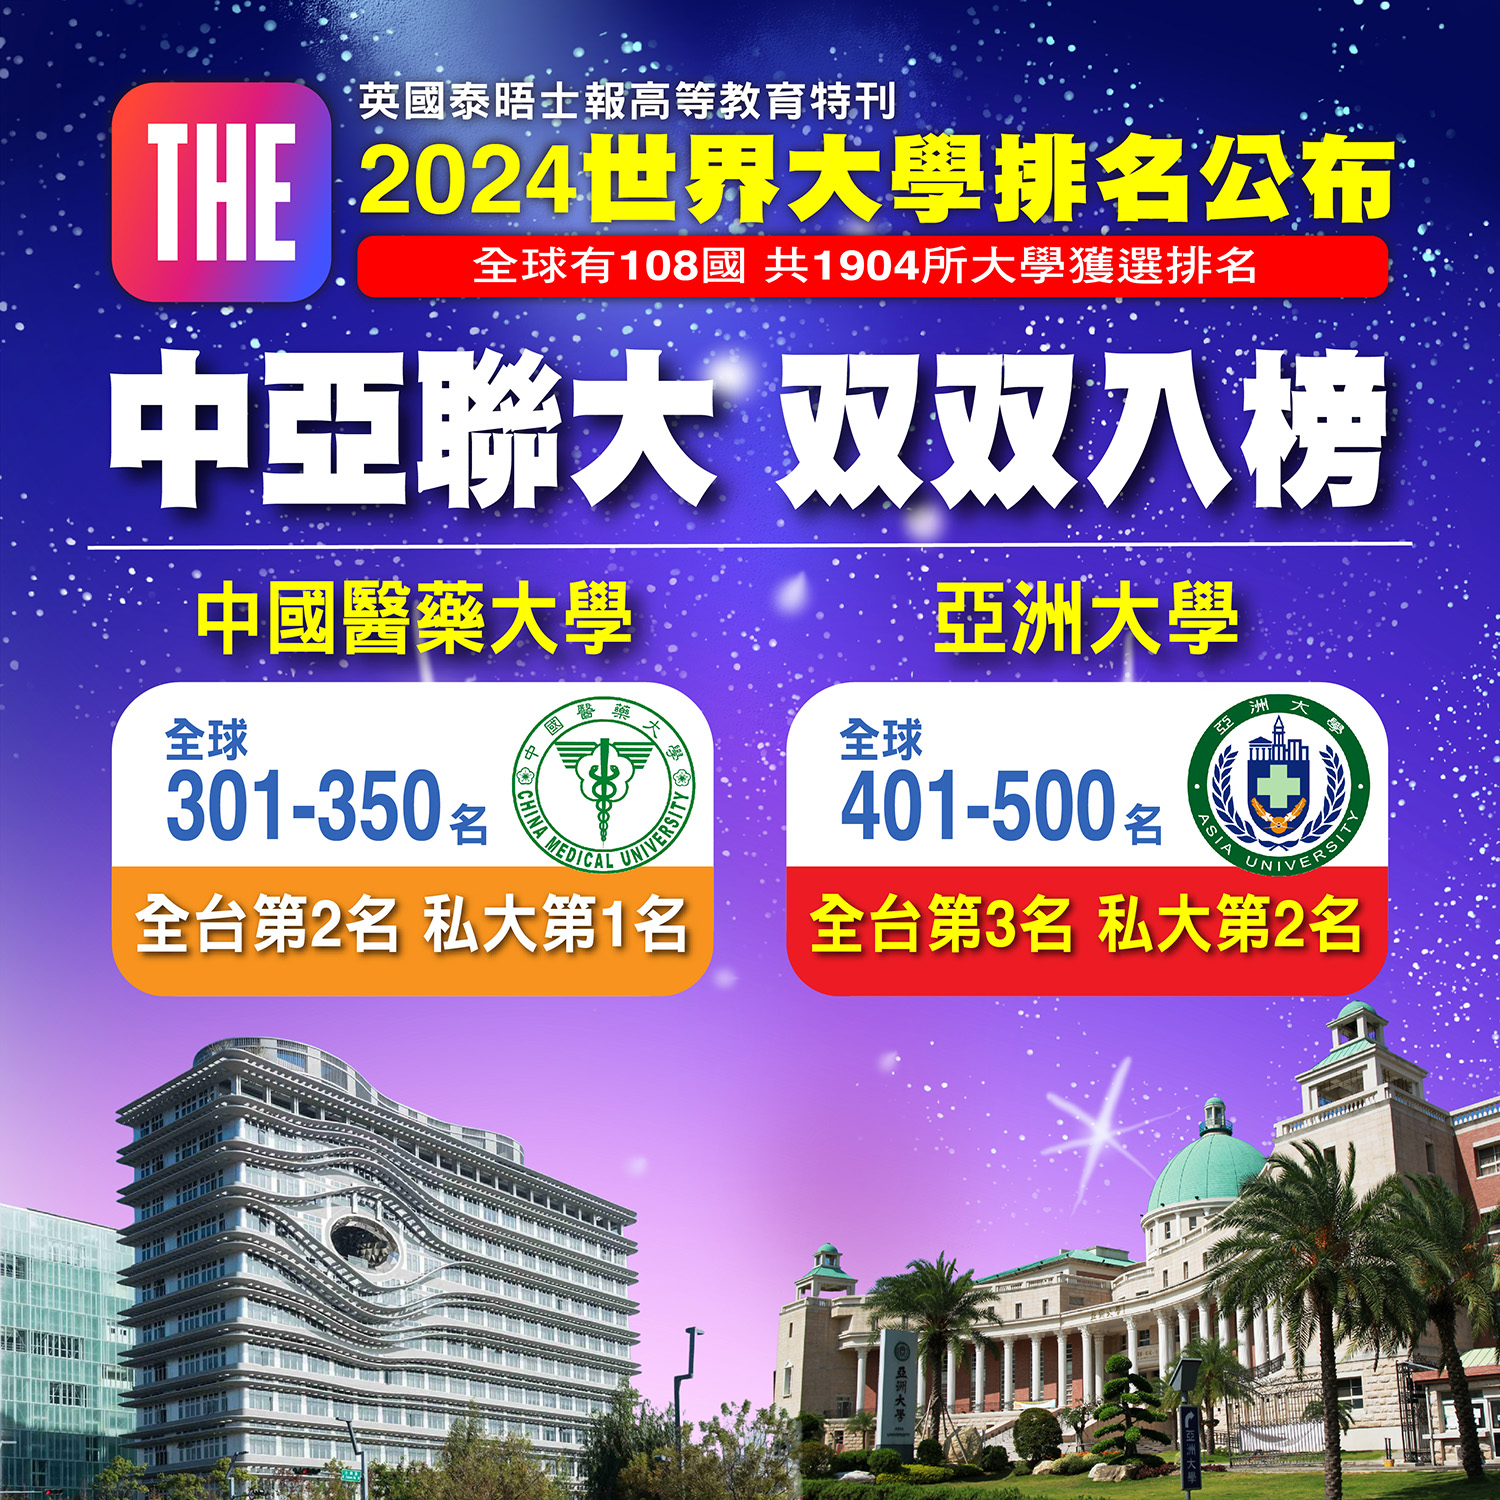 The Times Higher Education from the United Kingdom has released the " 2024 World University Rankings," and both China Medical University and Asia University, which are part of the "China Medical University- Asia University System," have been included in the rankings.